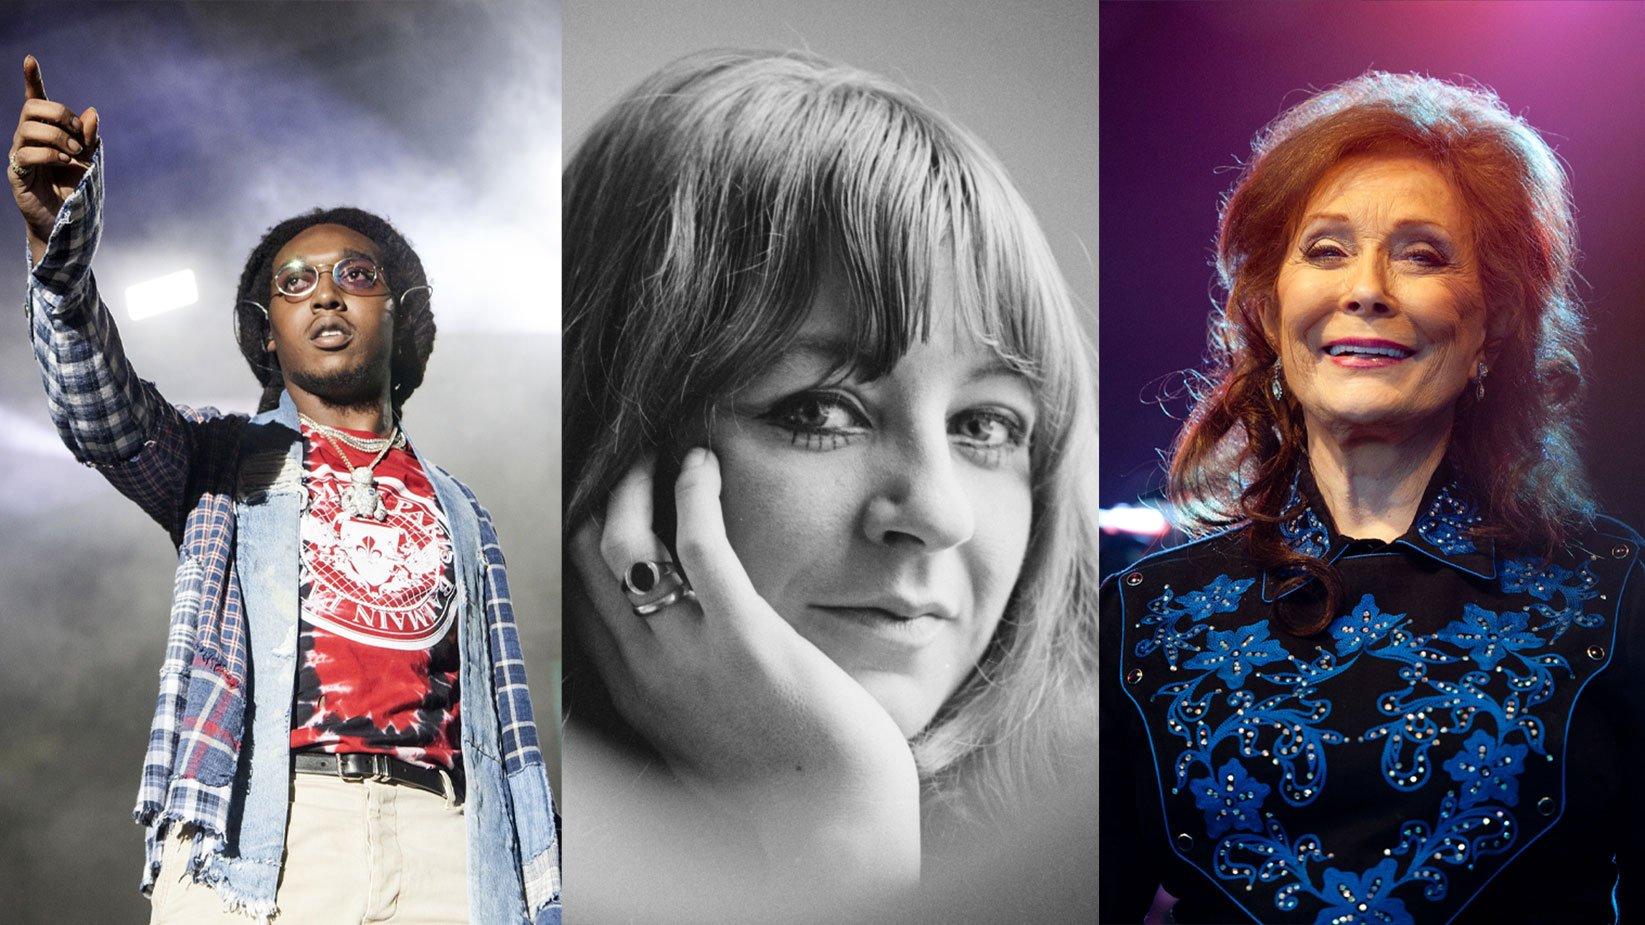 2023 GRAMMYs To Pay Tribute To Lost Icons With Star-Studded In Memoriam Segment Honoring Loretta Lynn, Christine McVie, And Takeoff GRAMMY